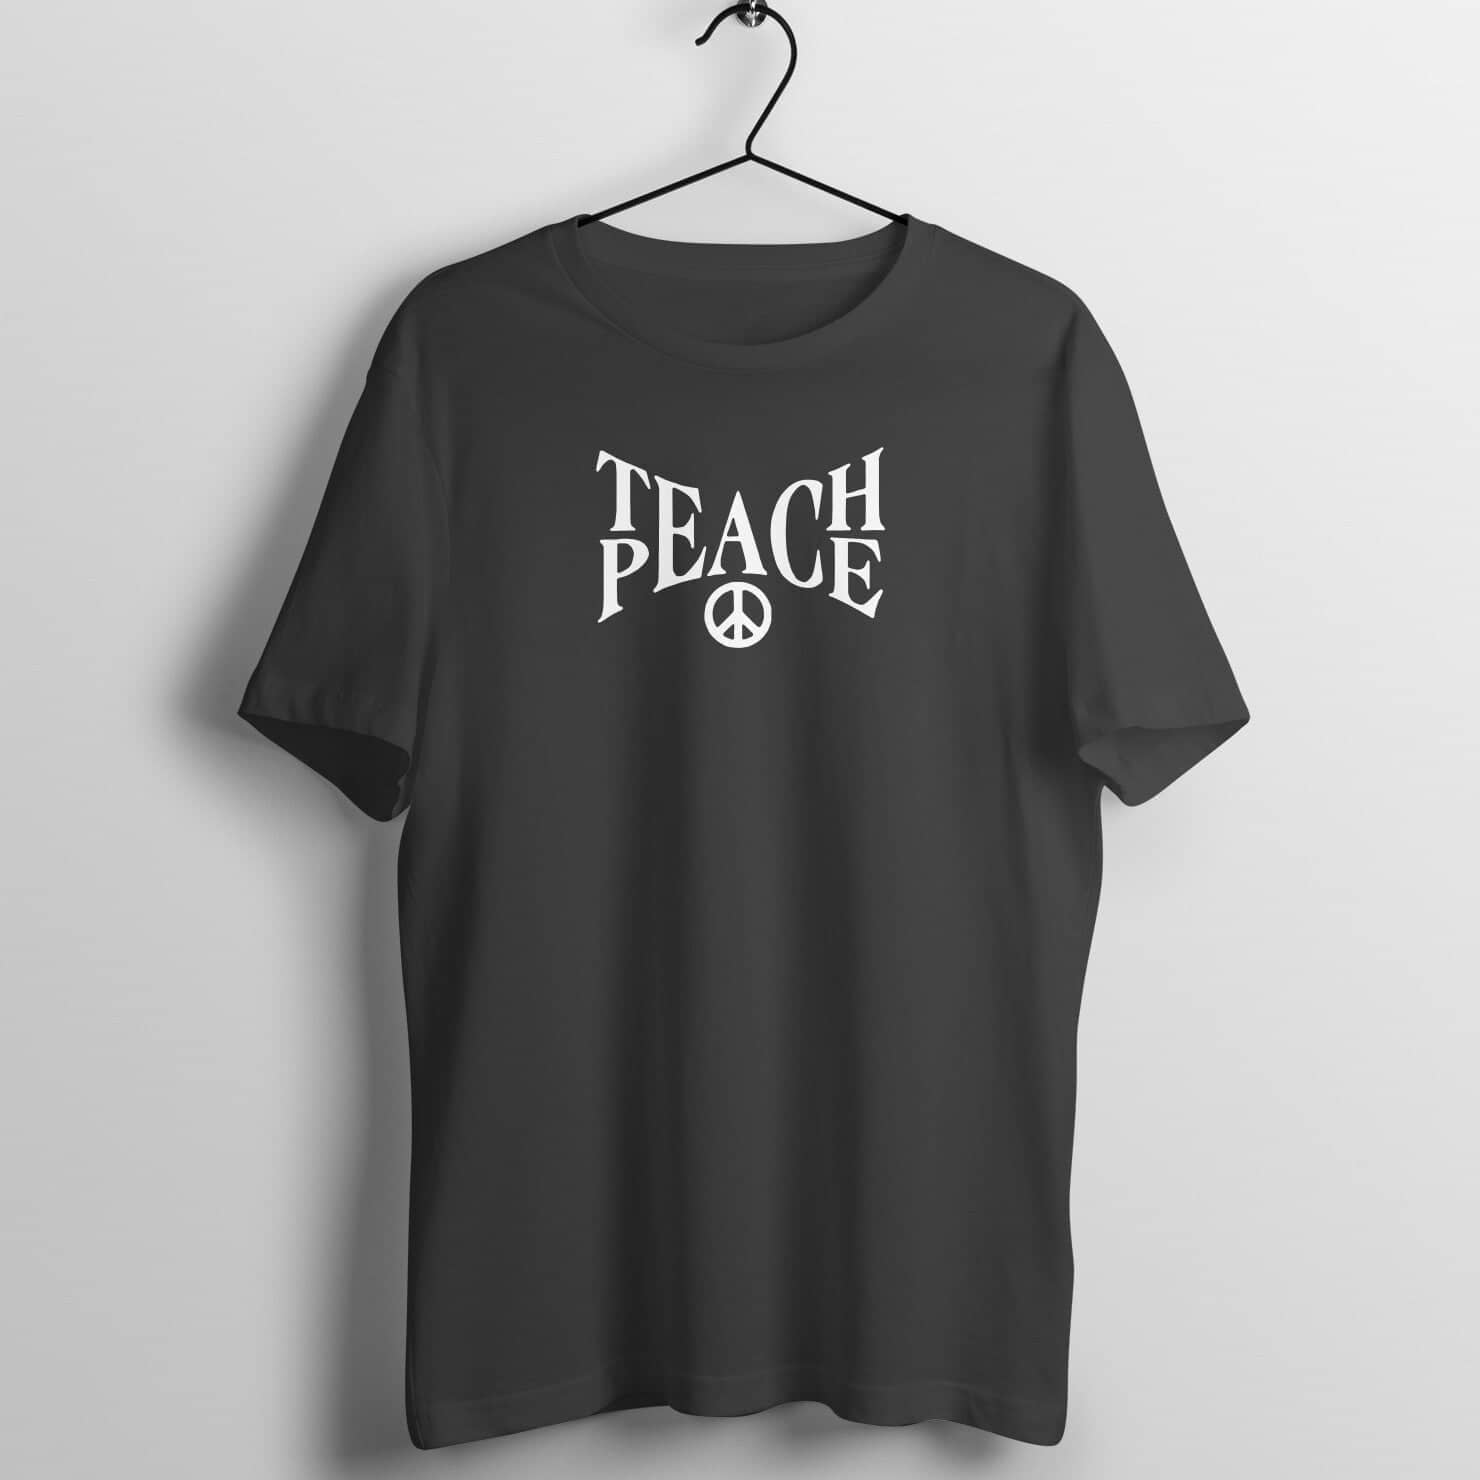 Teach Peace Special Black T Shirt for Men and Women freeshipping - Catch My Drift India